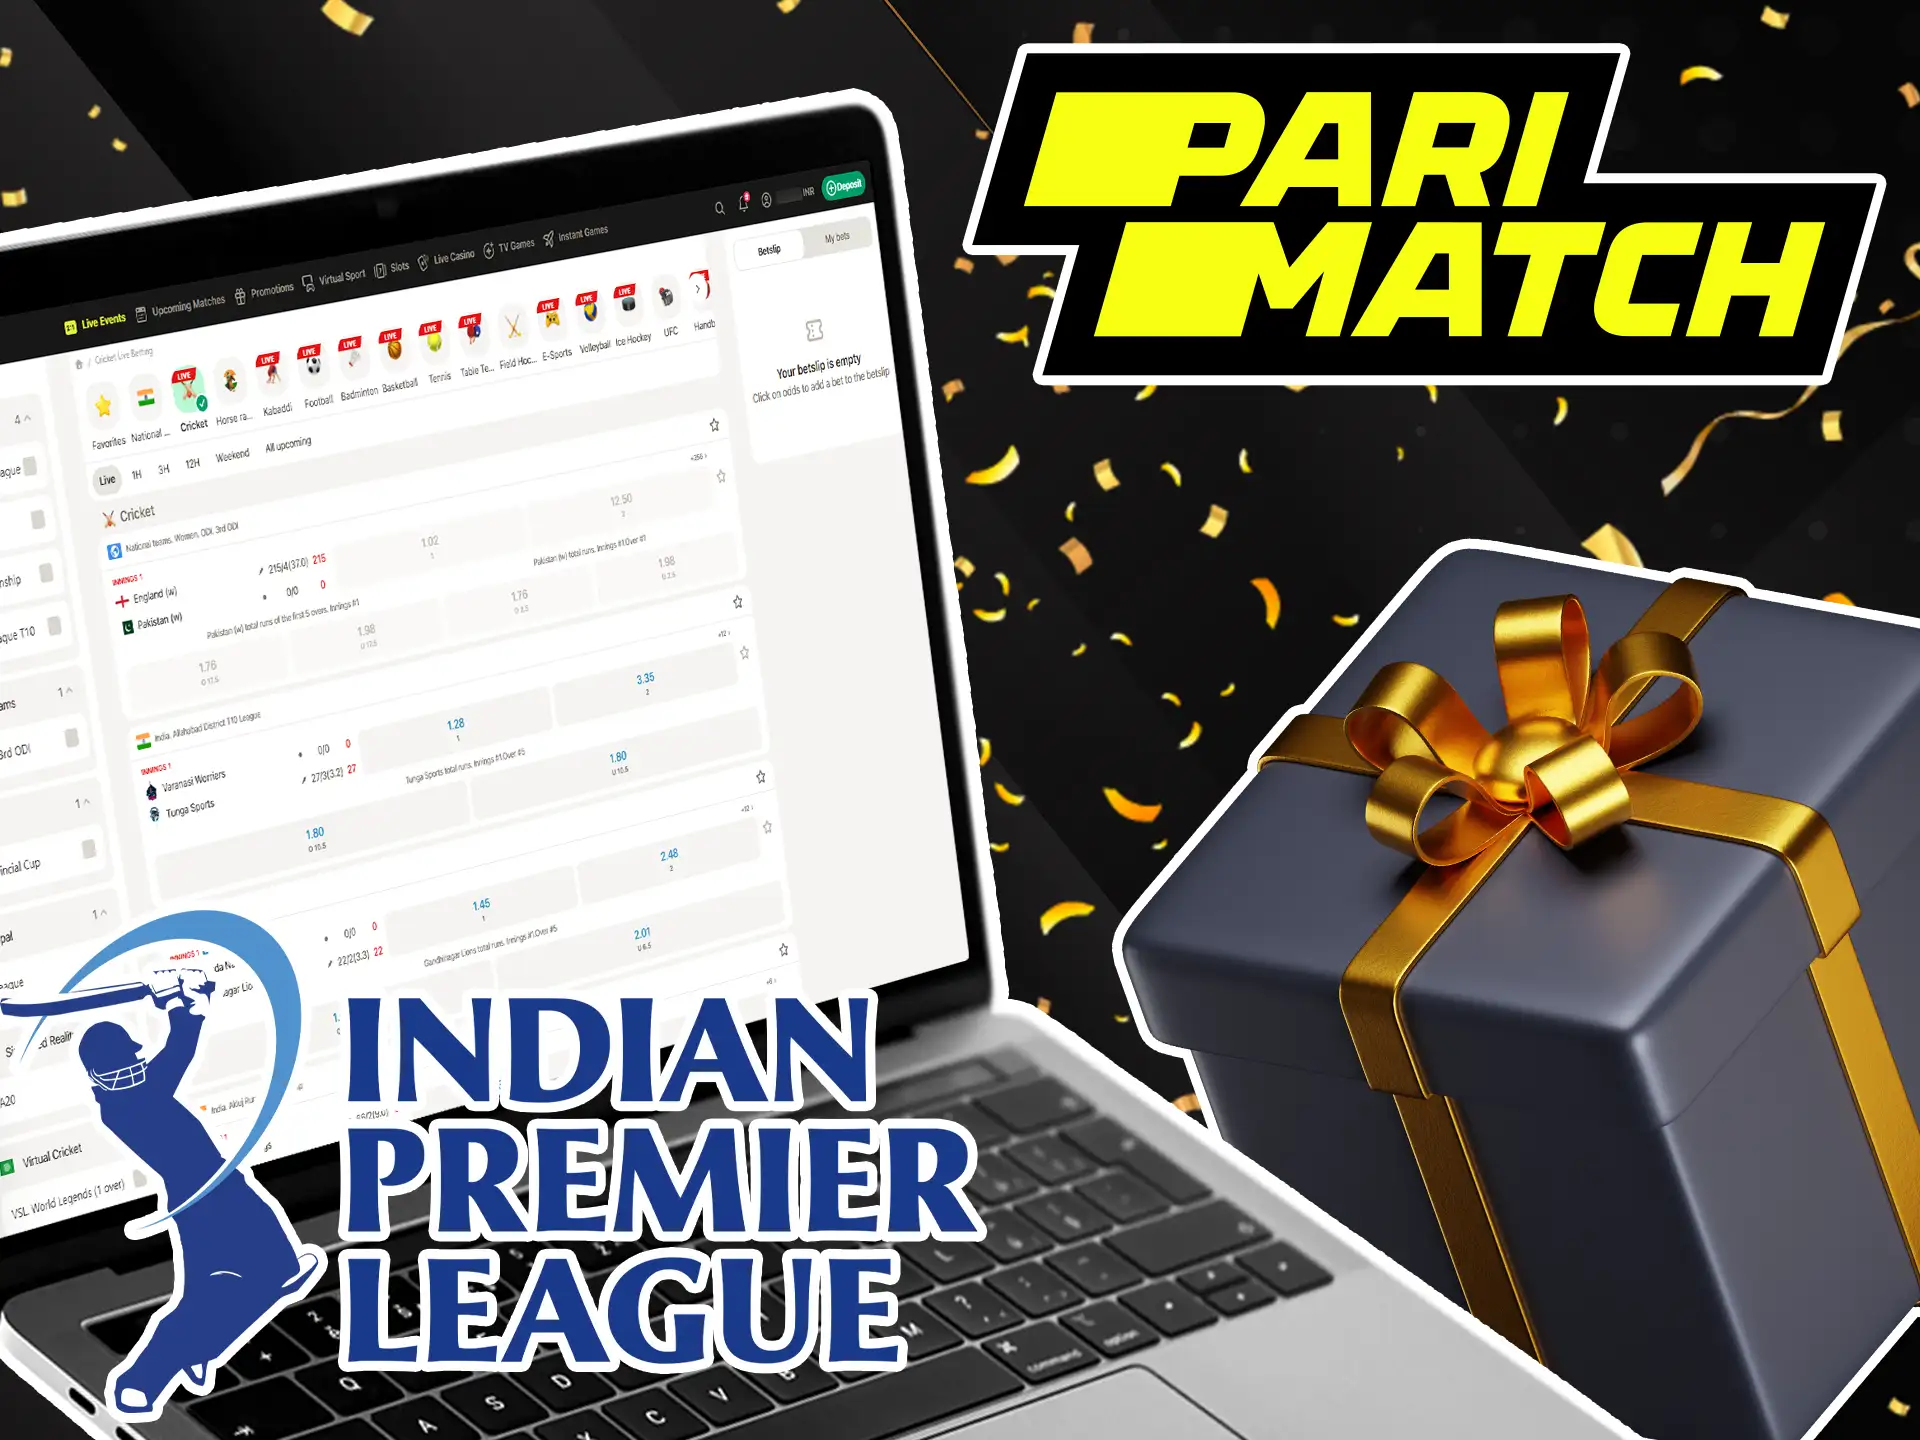 Increase your potential rewards on IPL cricket with a Parimatch promo code.